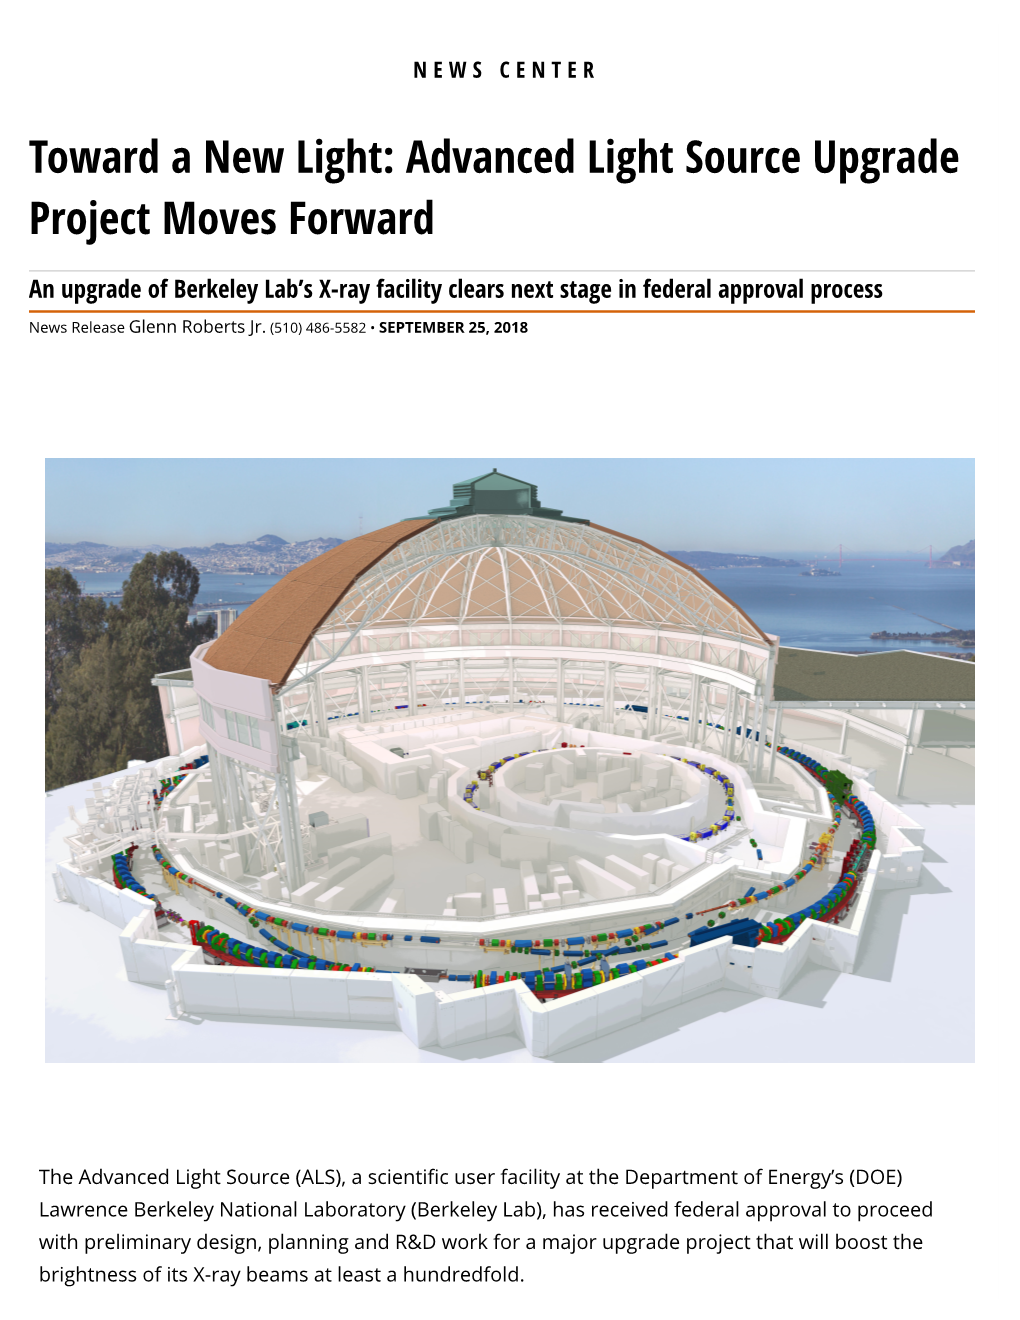 Toward a New Light: Advanced Light Source Upgrade Project Moves Forward